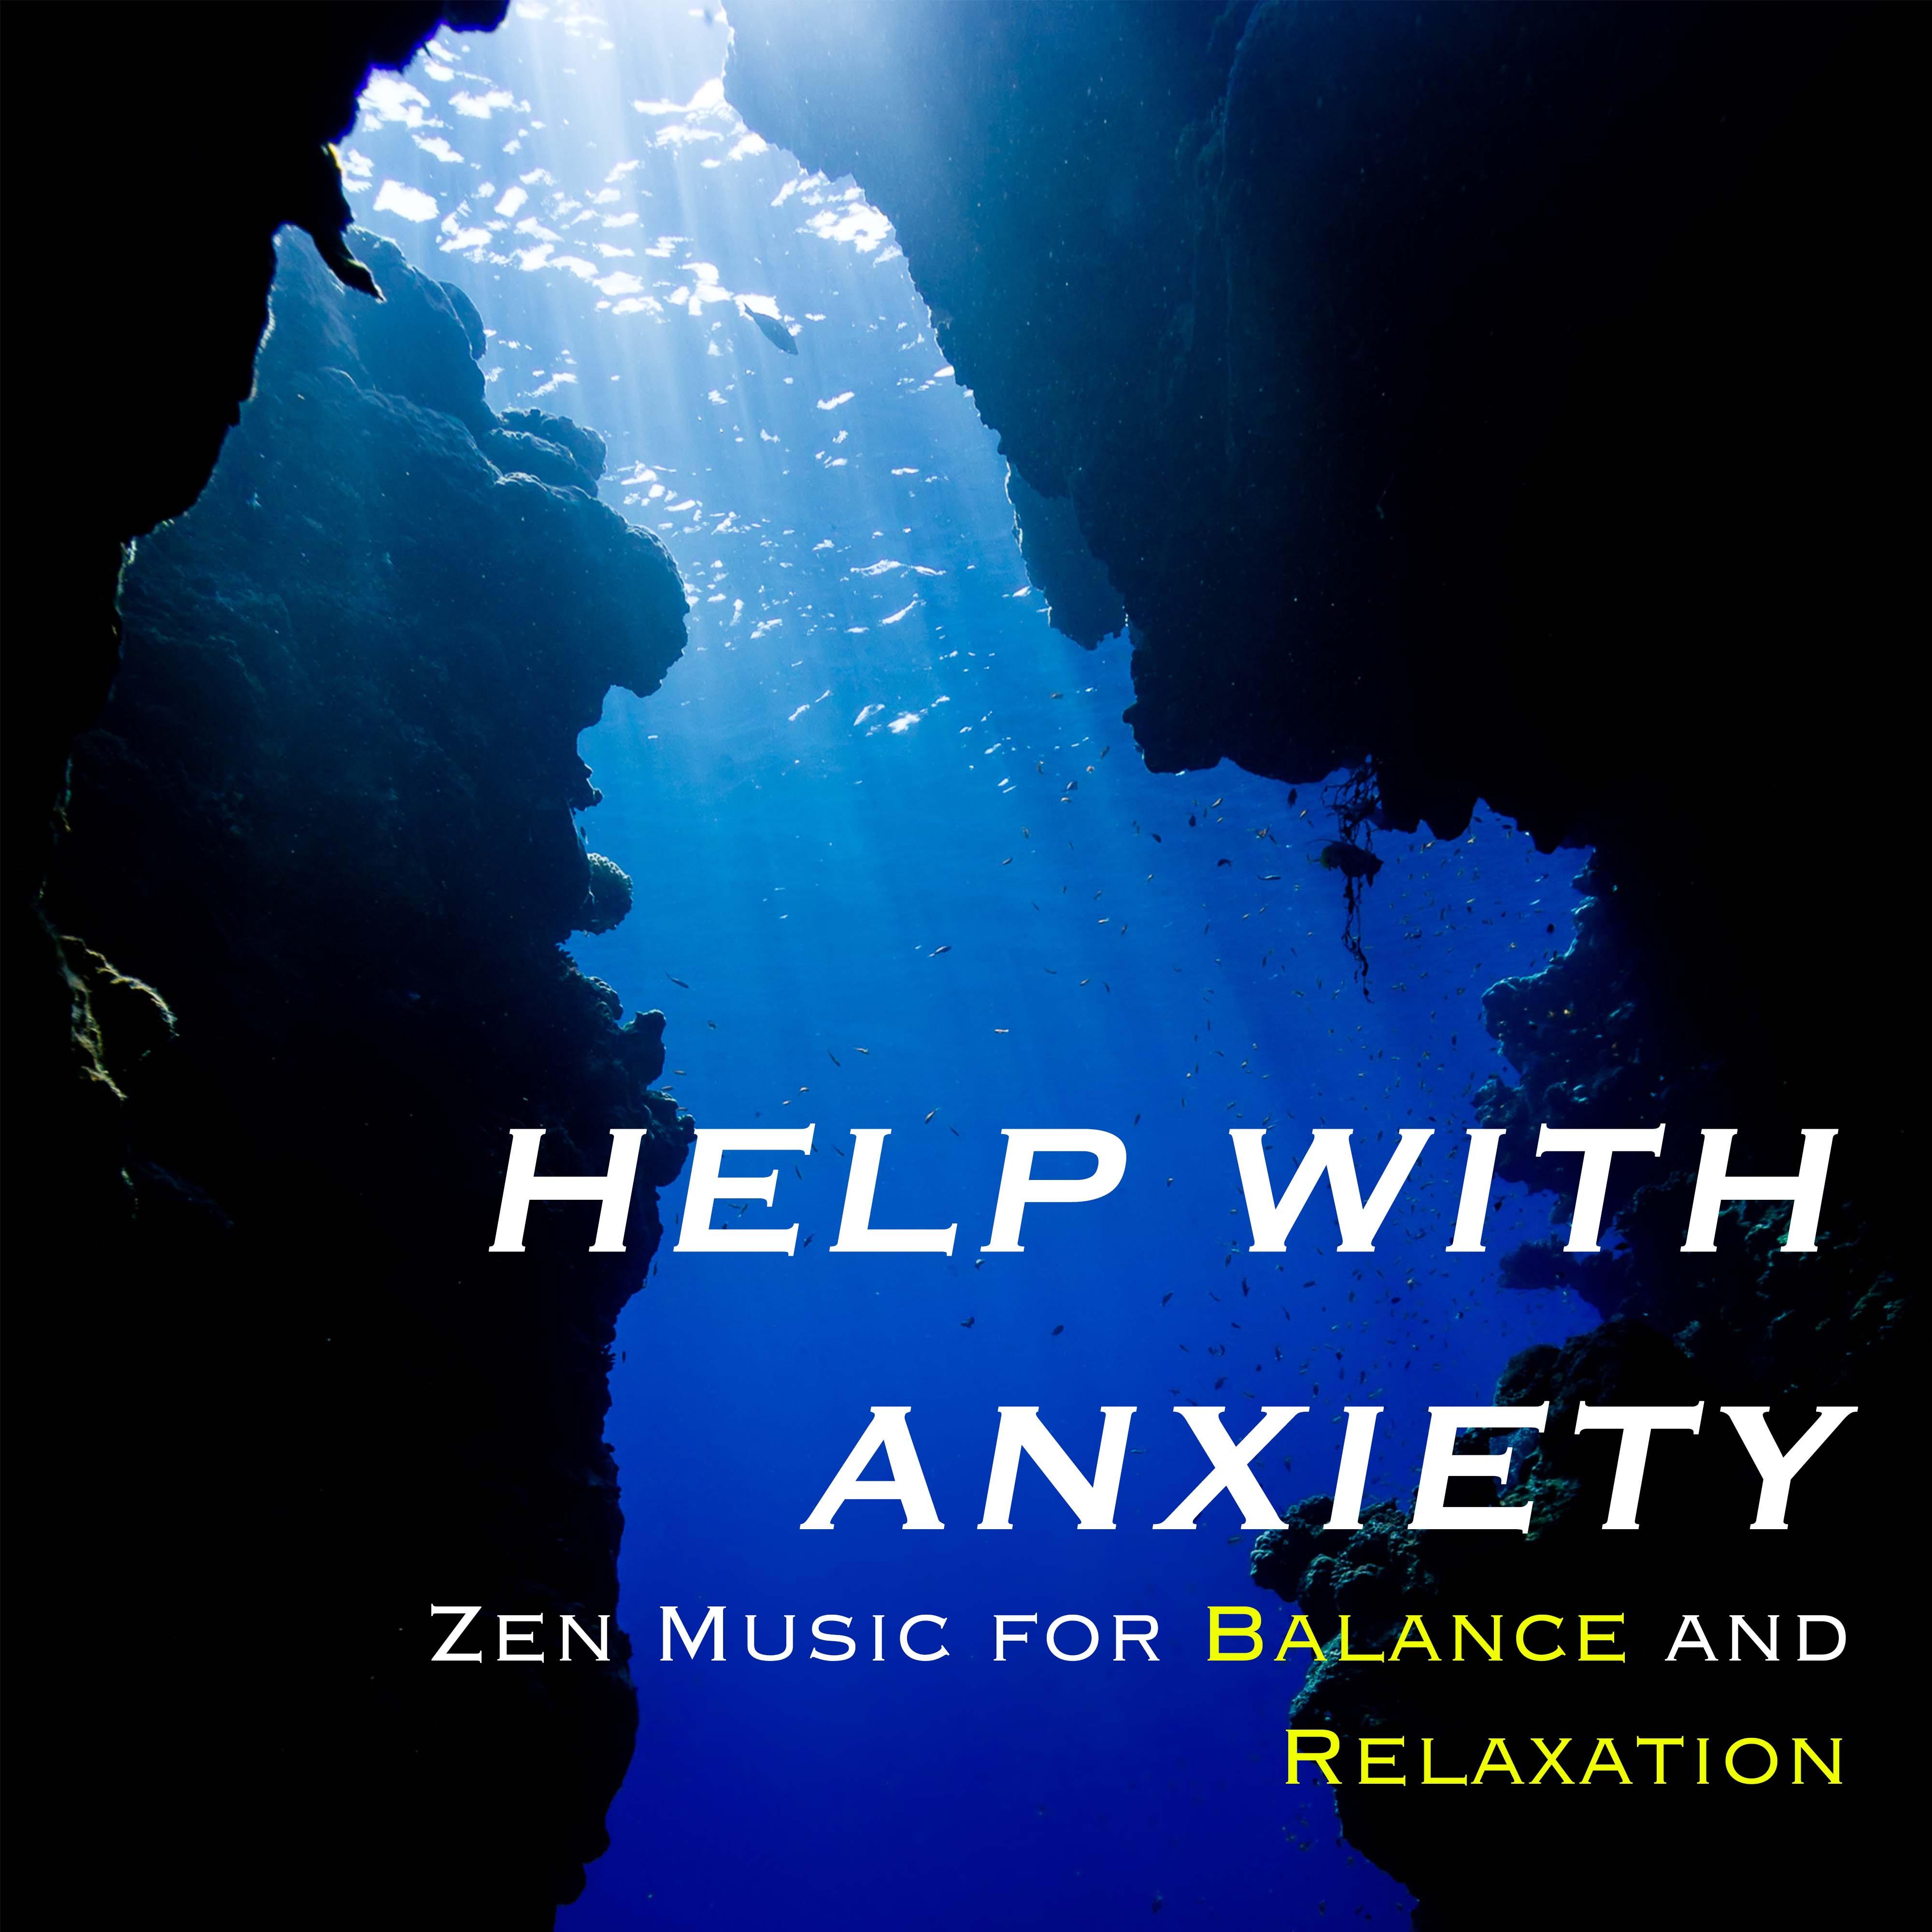 Help with Anxiety - Zen Music for Balance and Relaxation